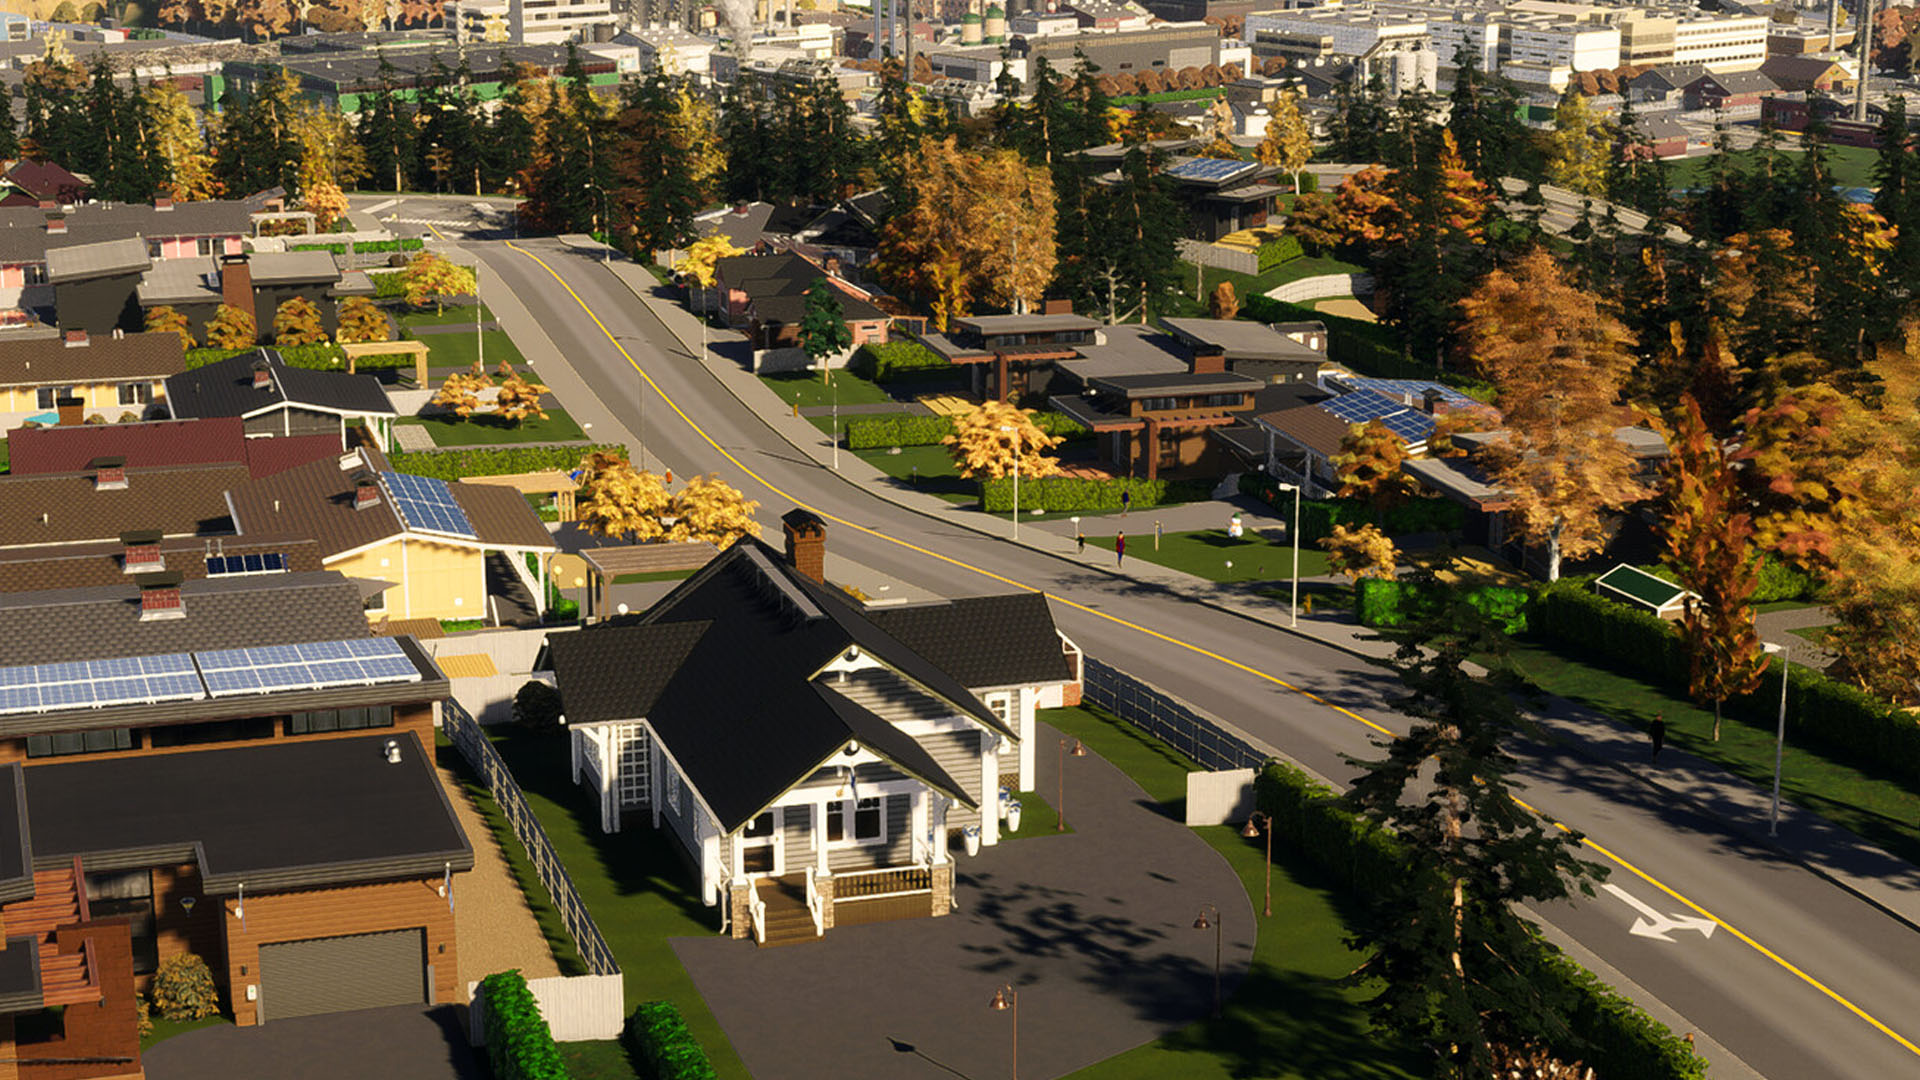 Cities Skylines 2 economy patch suddenly delayed just before launch